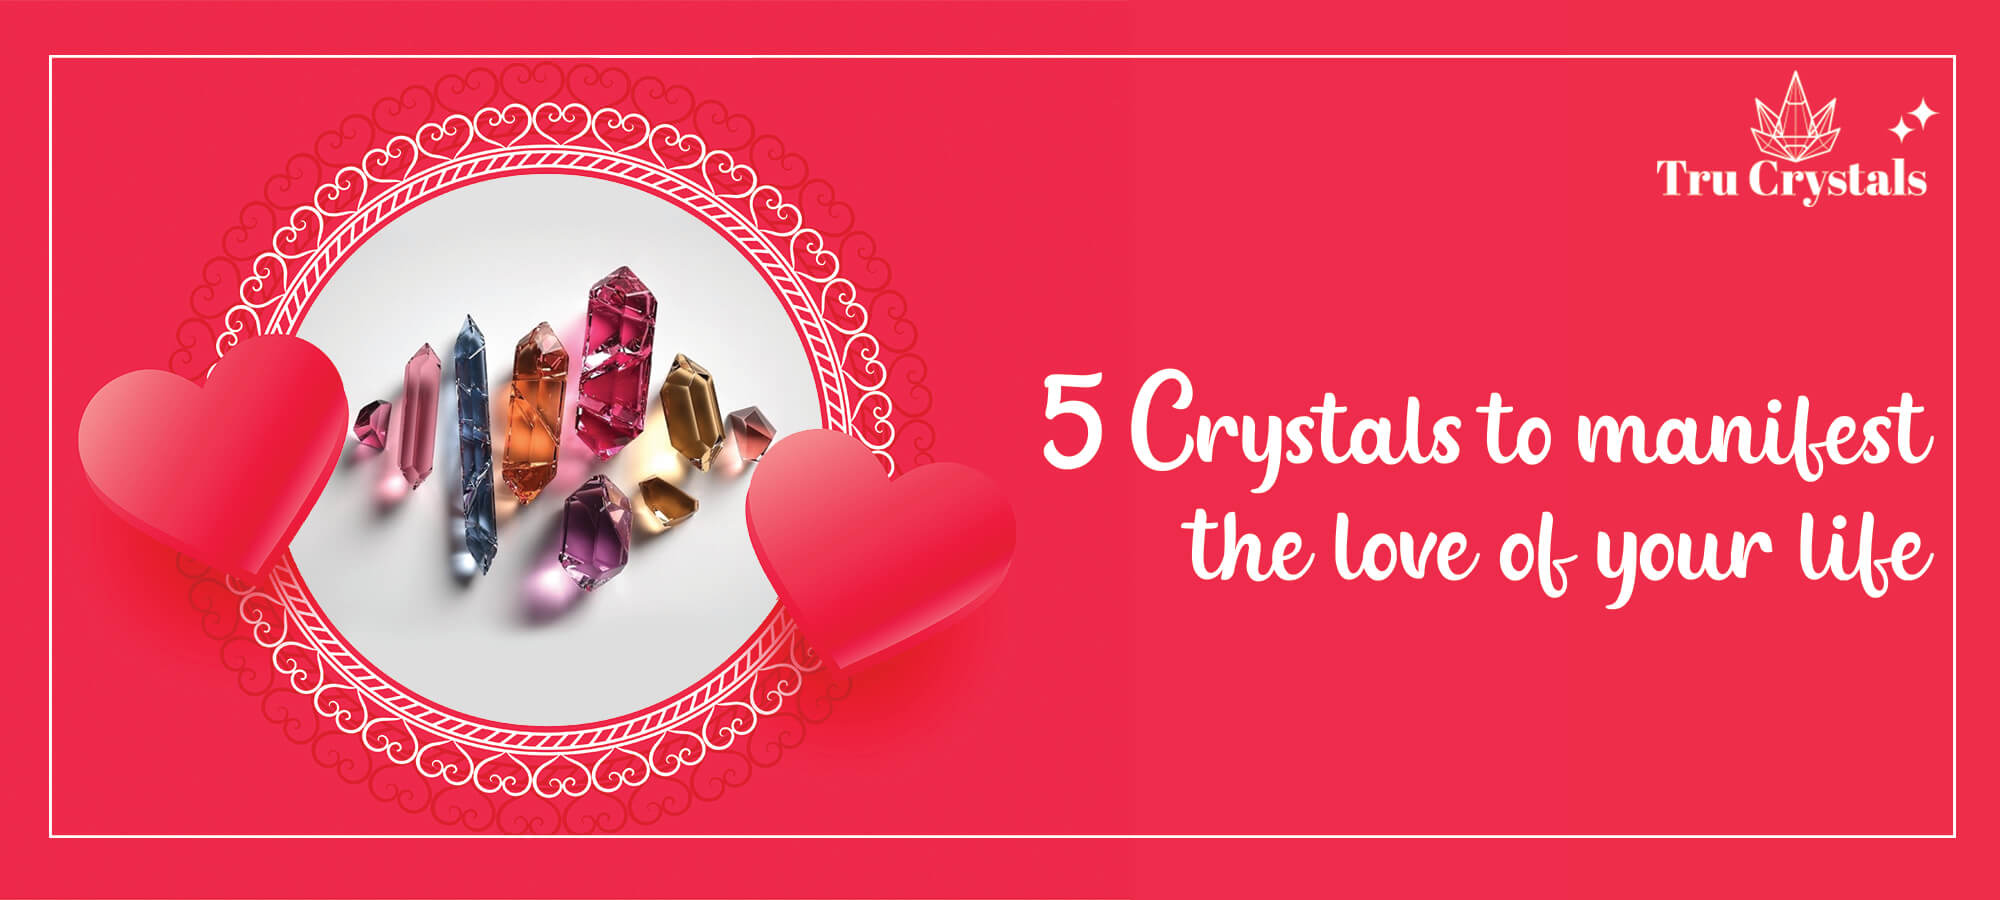 5 crystals to manifest the love of your life – Trucrystals.in